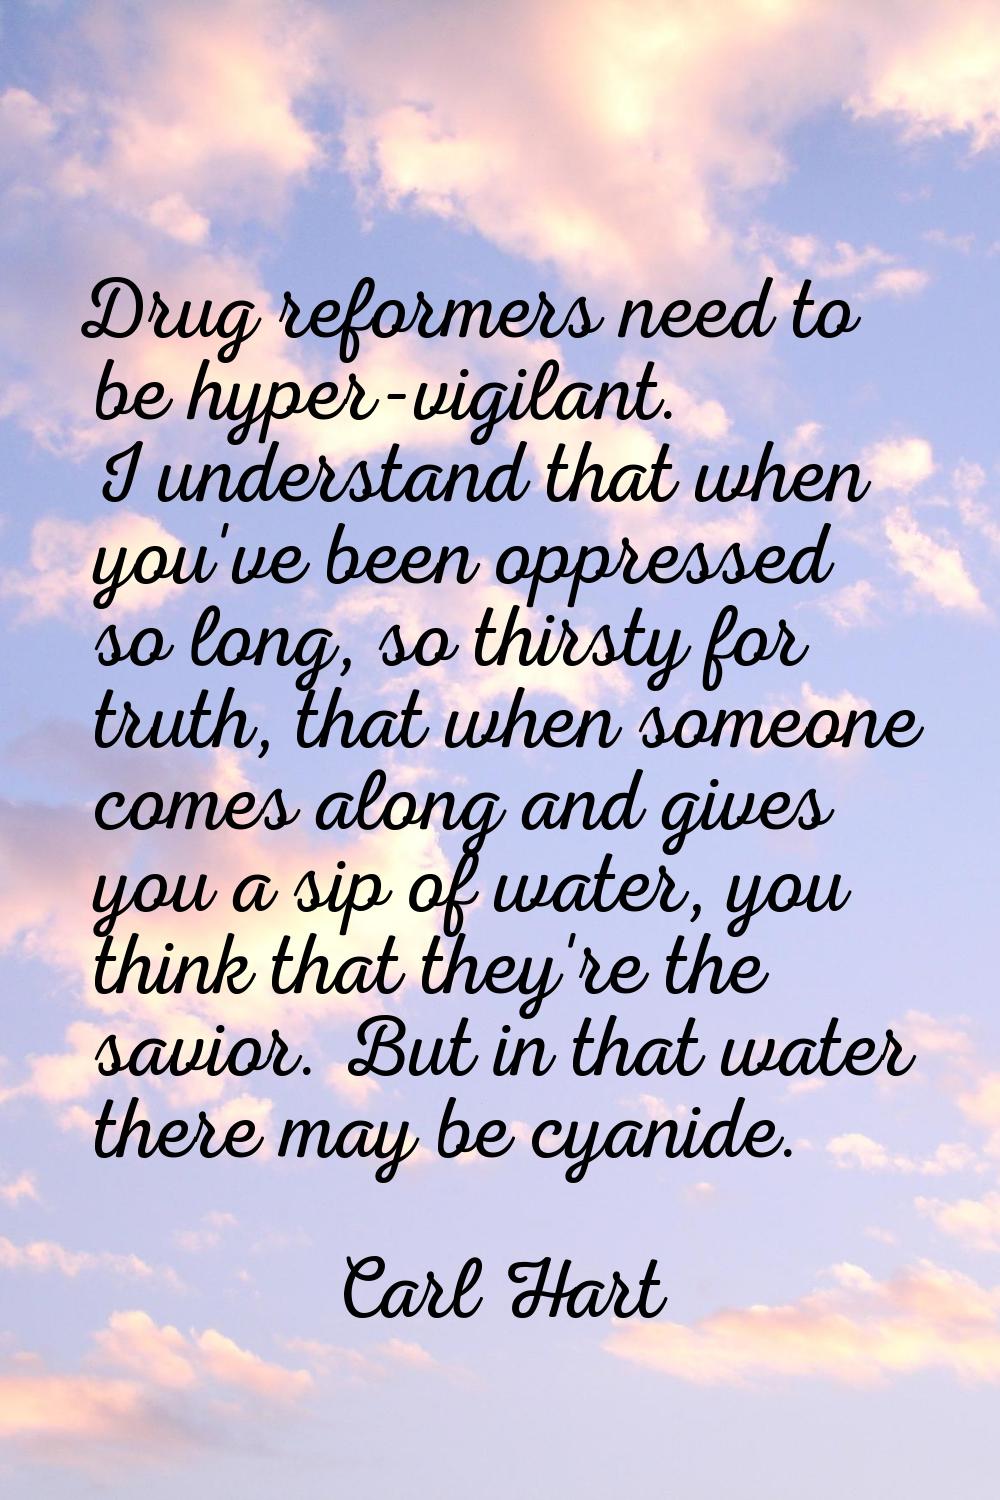 Drug reformers need to be hyper-vigilant. I understand that when you've been oppressed so long, so 